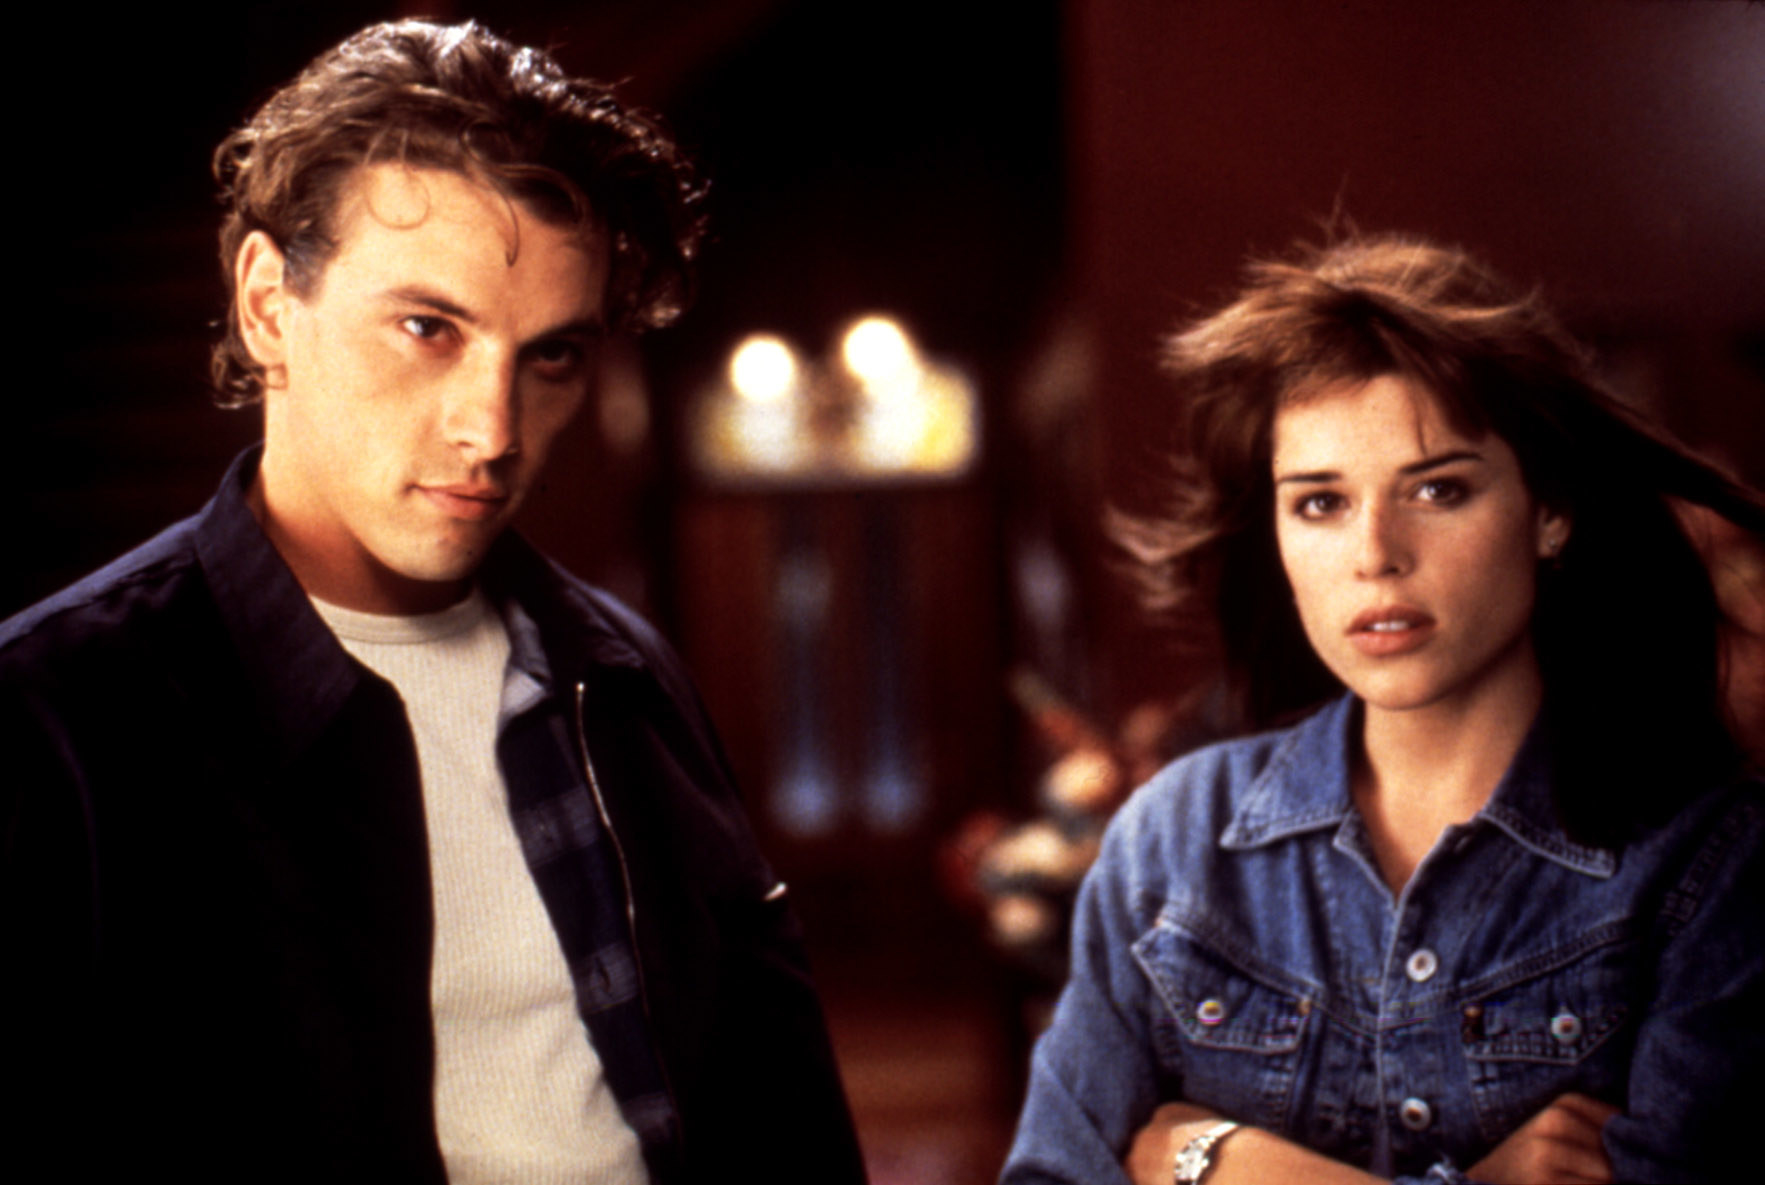 Skeet Ulrich and Neve Campbell in Scream